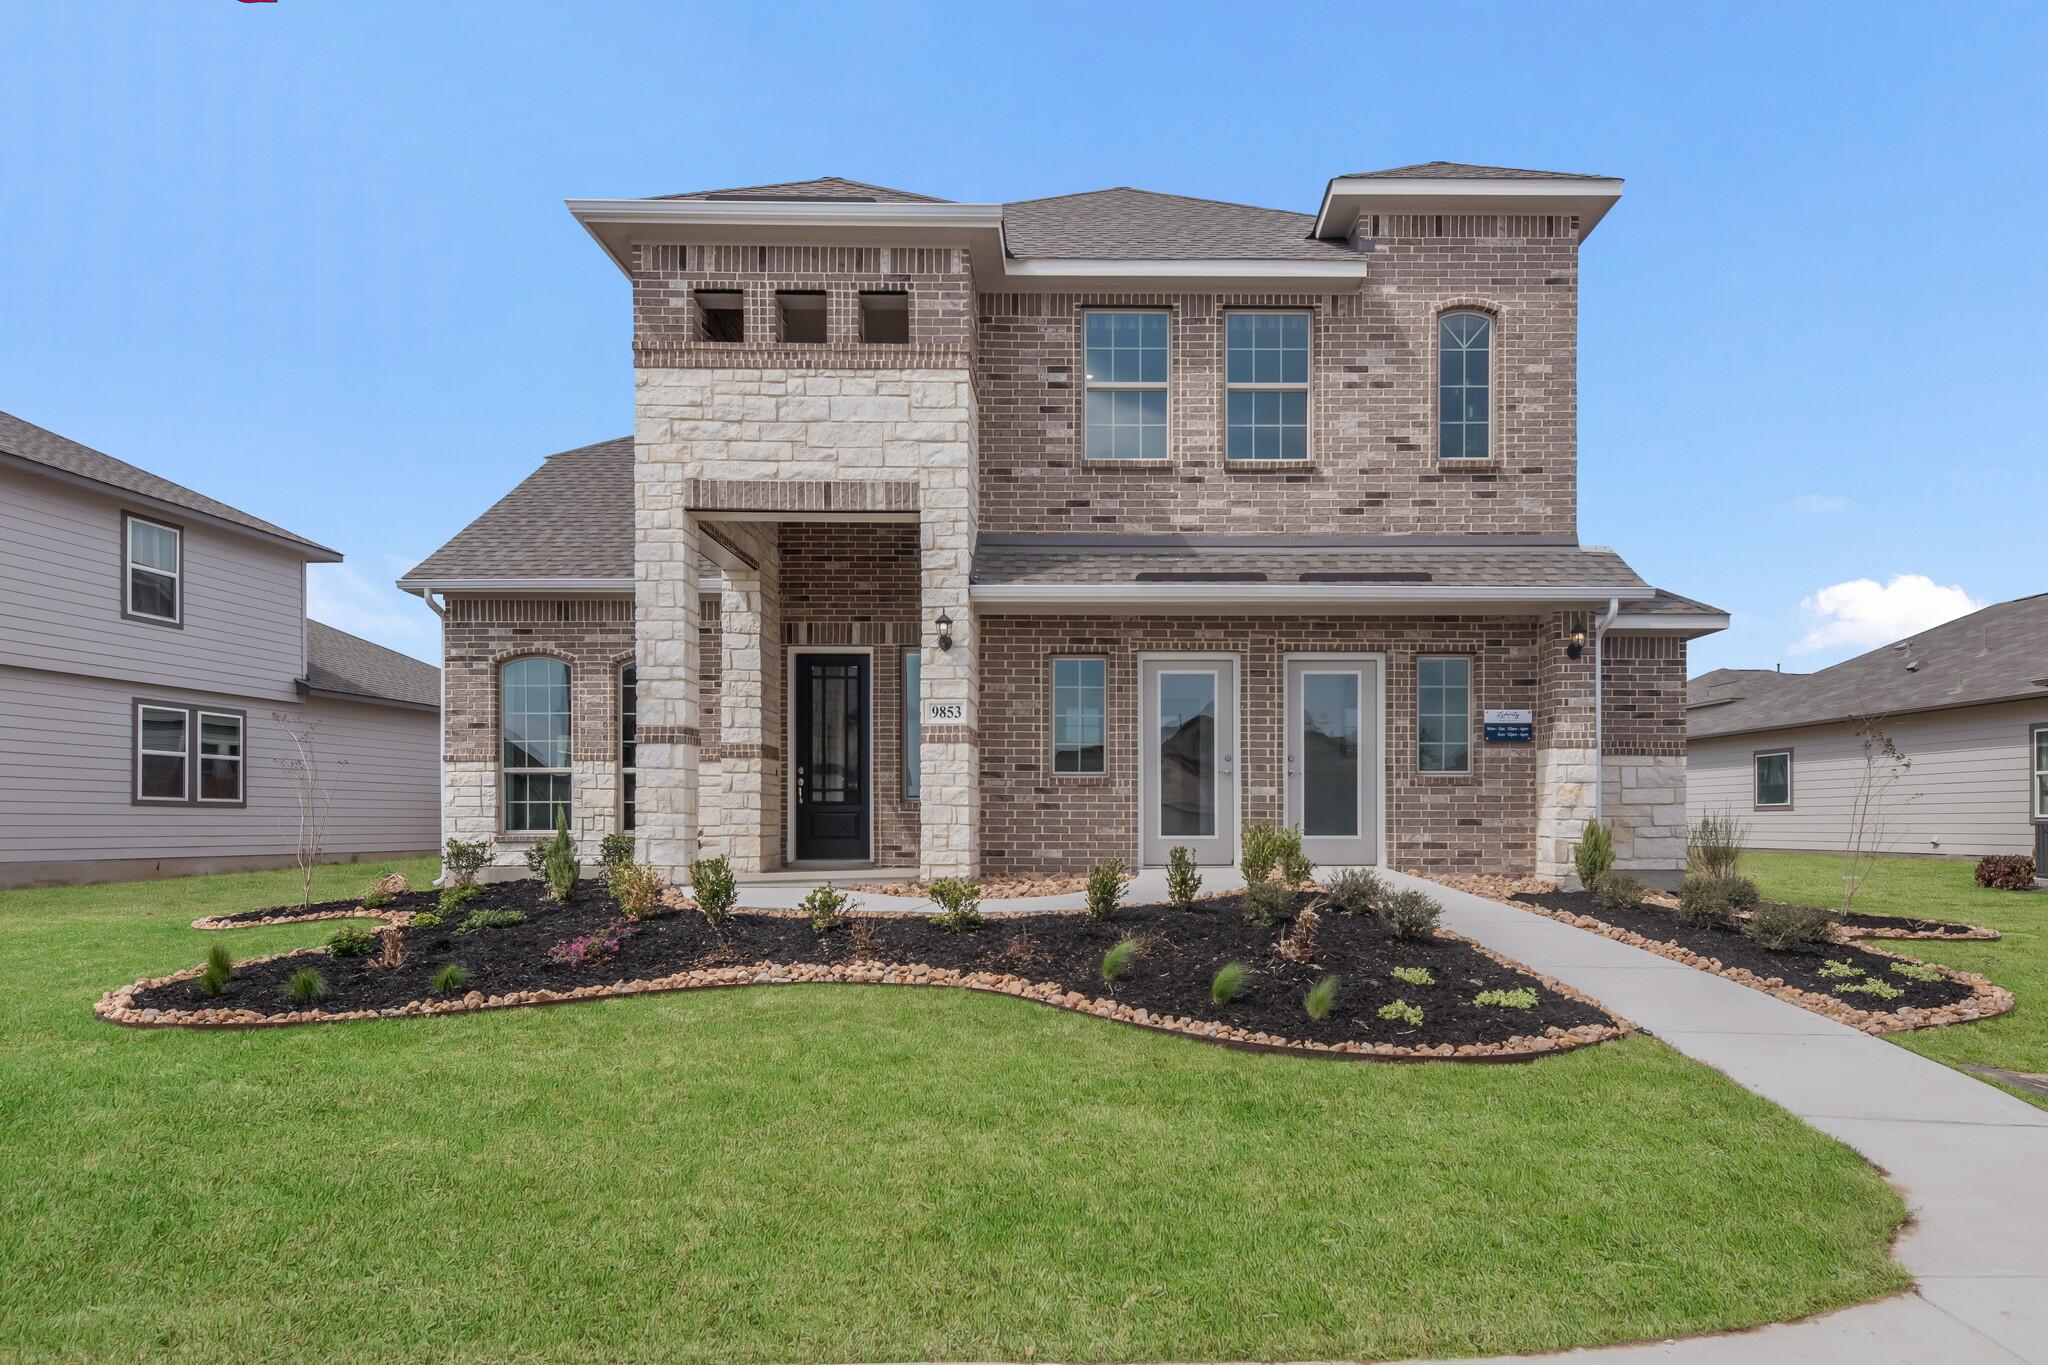 Rhine Valley - New Homes for Sale in Schertz, TX 78154 | Liberty Home  Builders